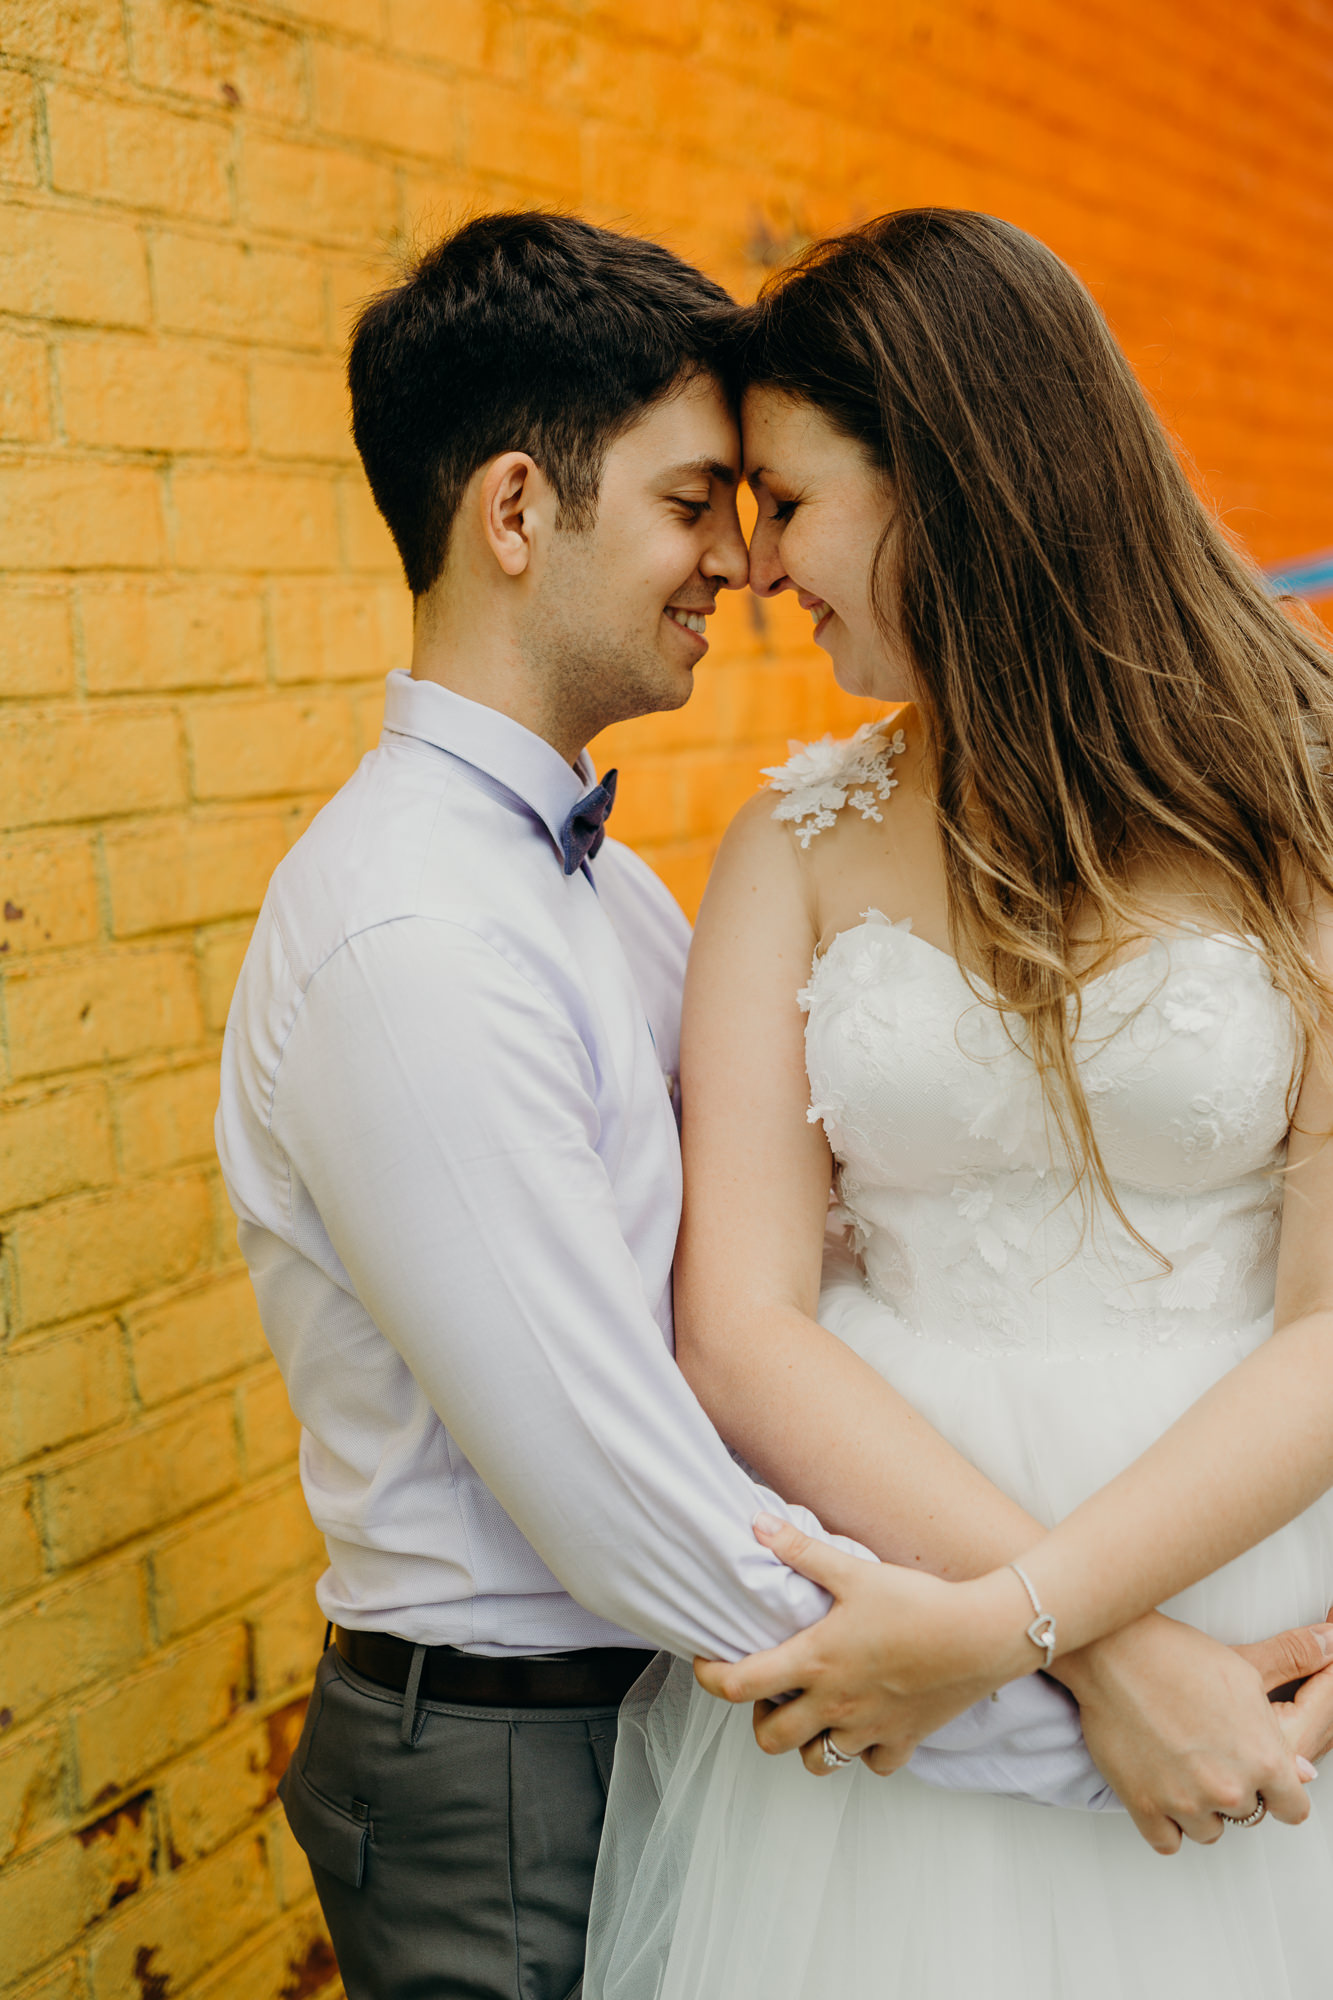 a portrait of a bride and groom in DUMBO in brooklyn, new york